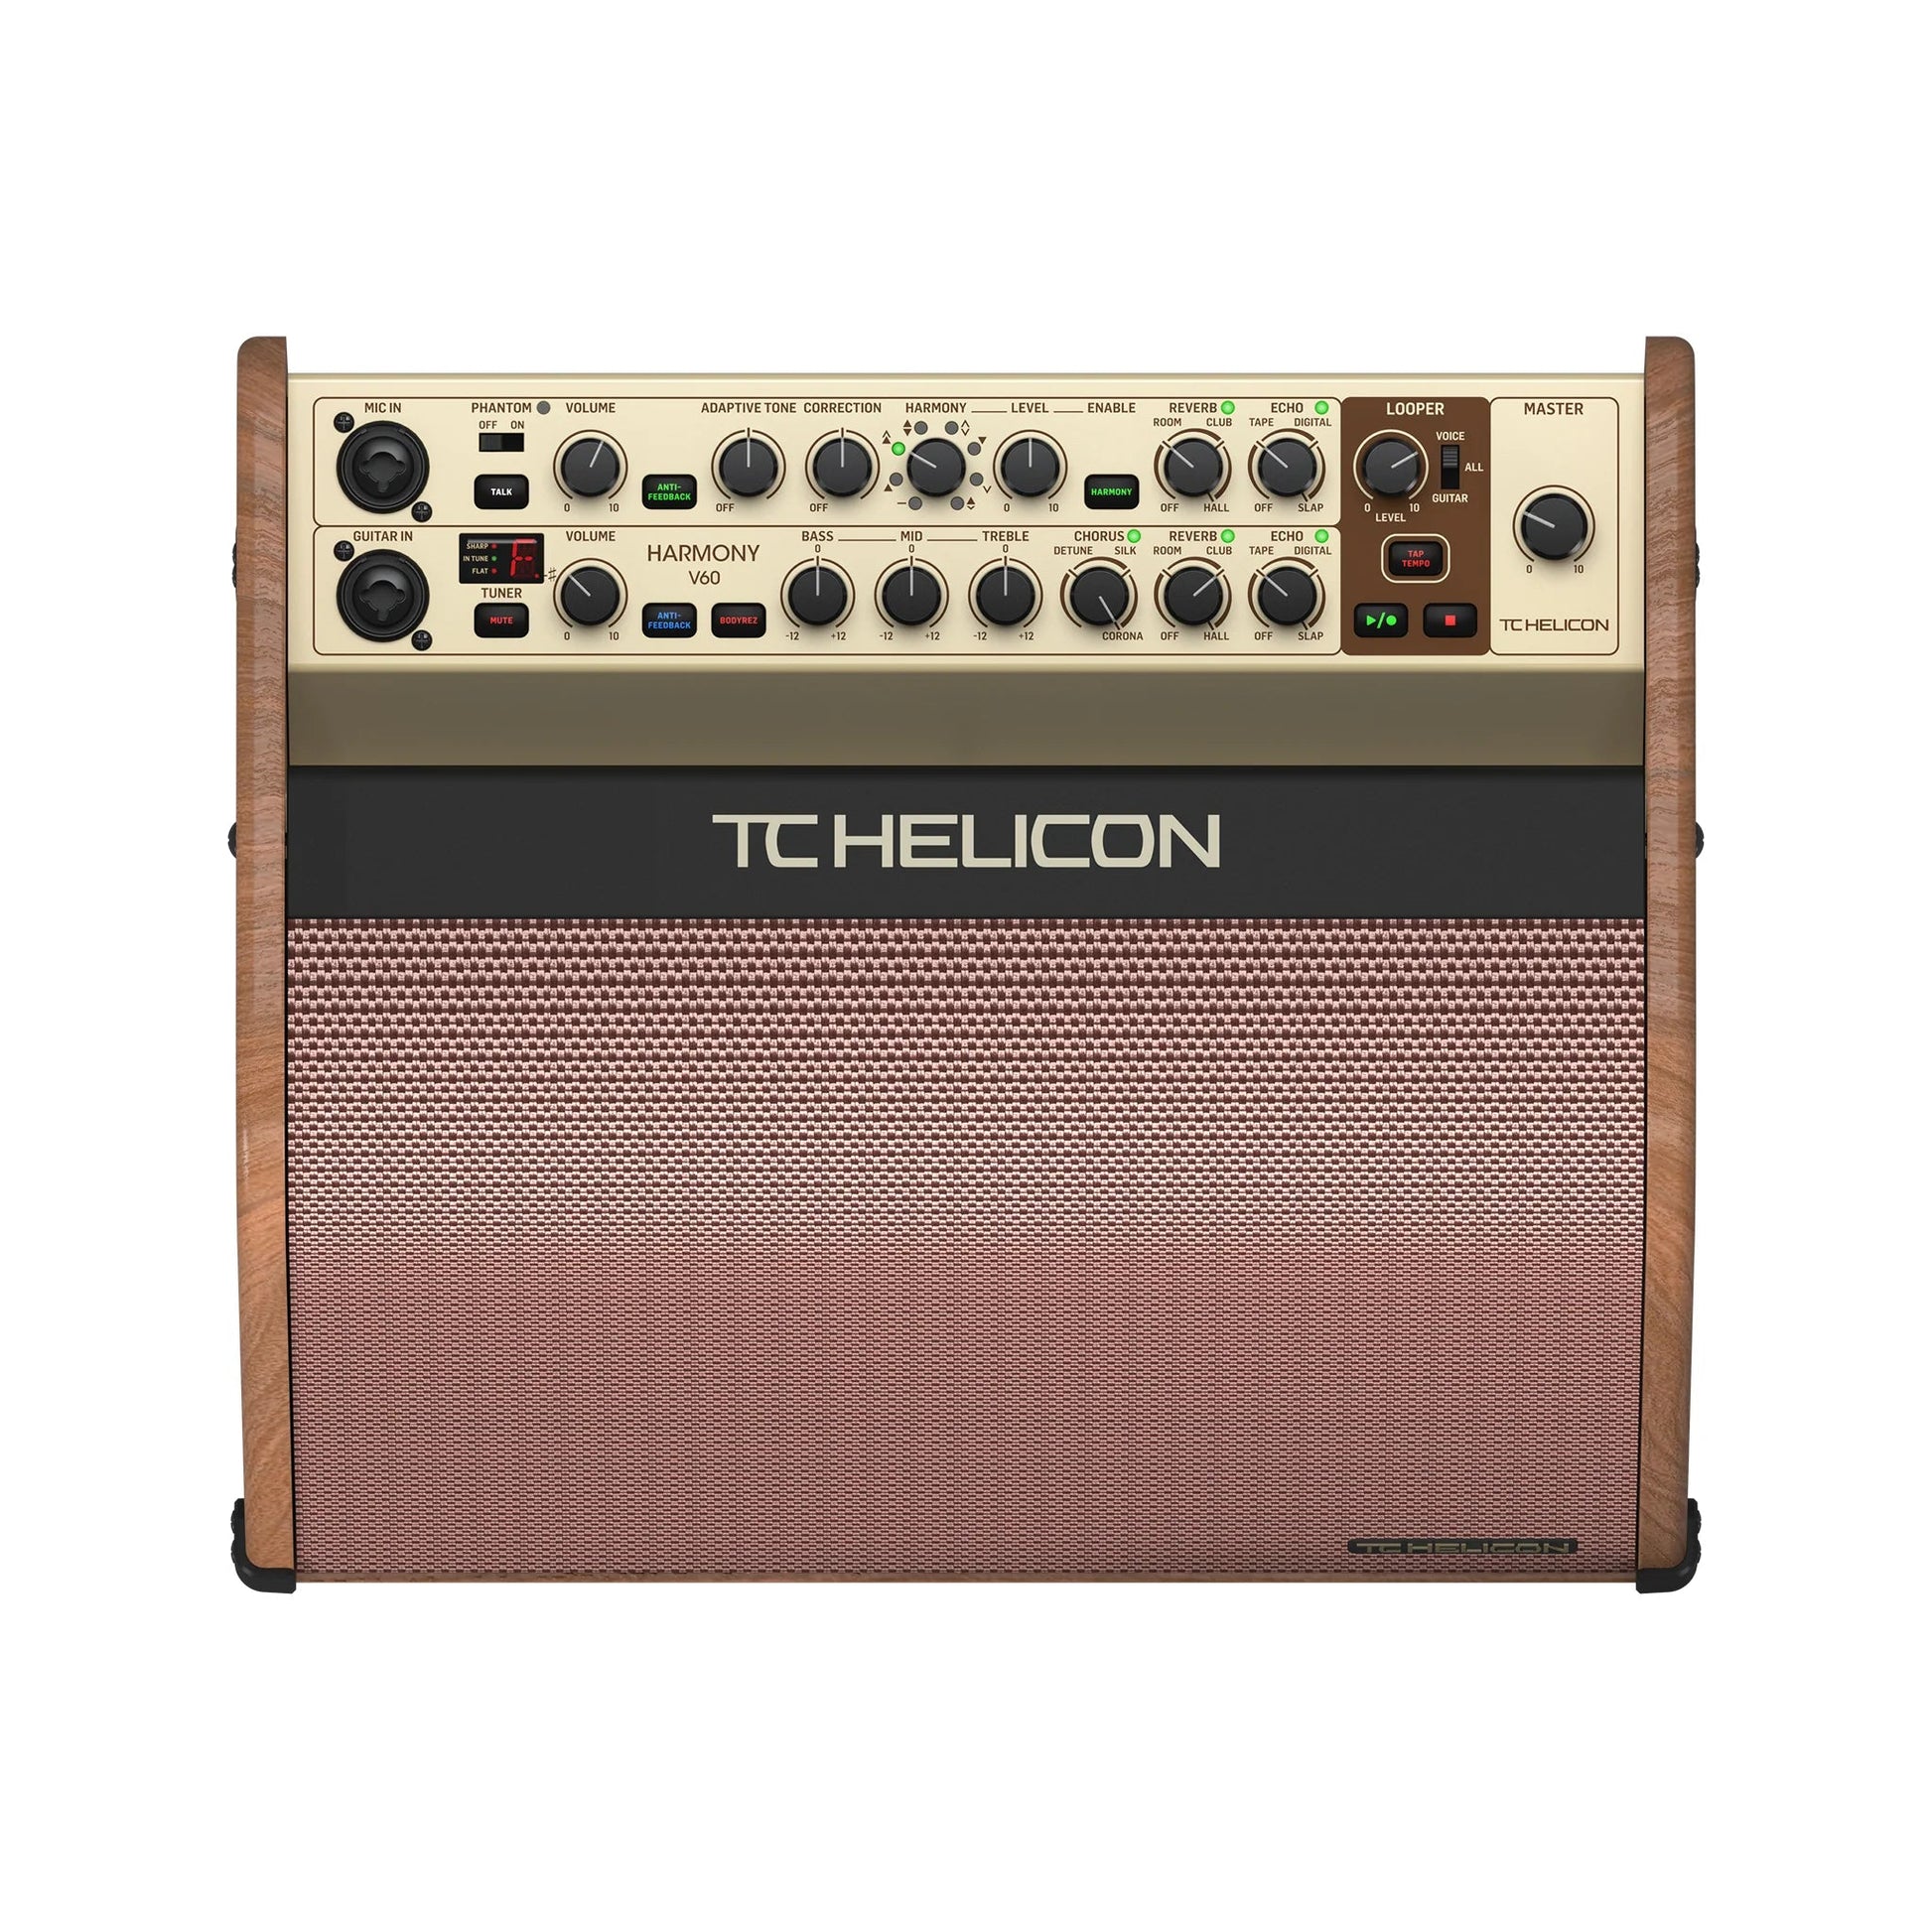 Amplifier TC Helicon Harmony V60, Combo - Việt Music